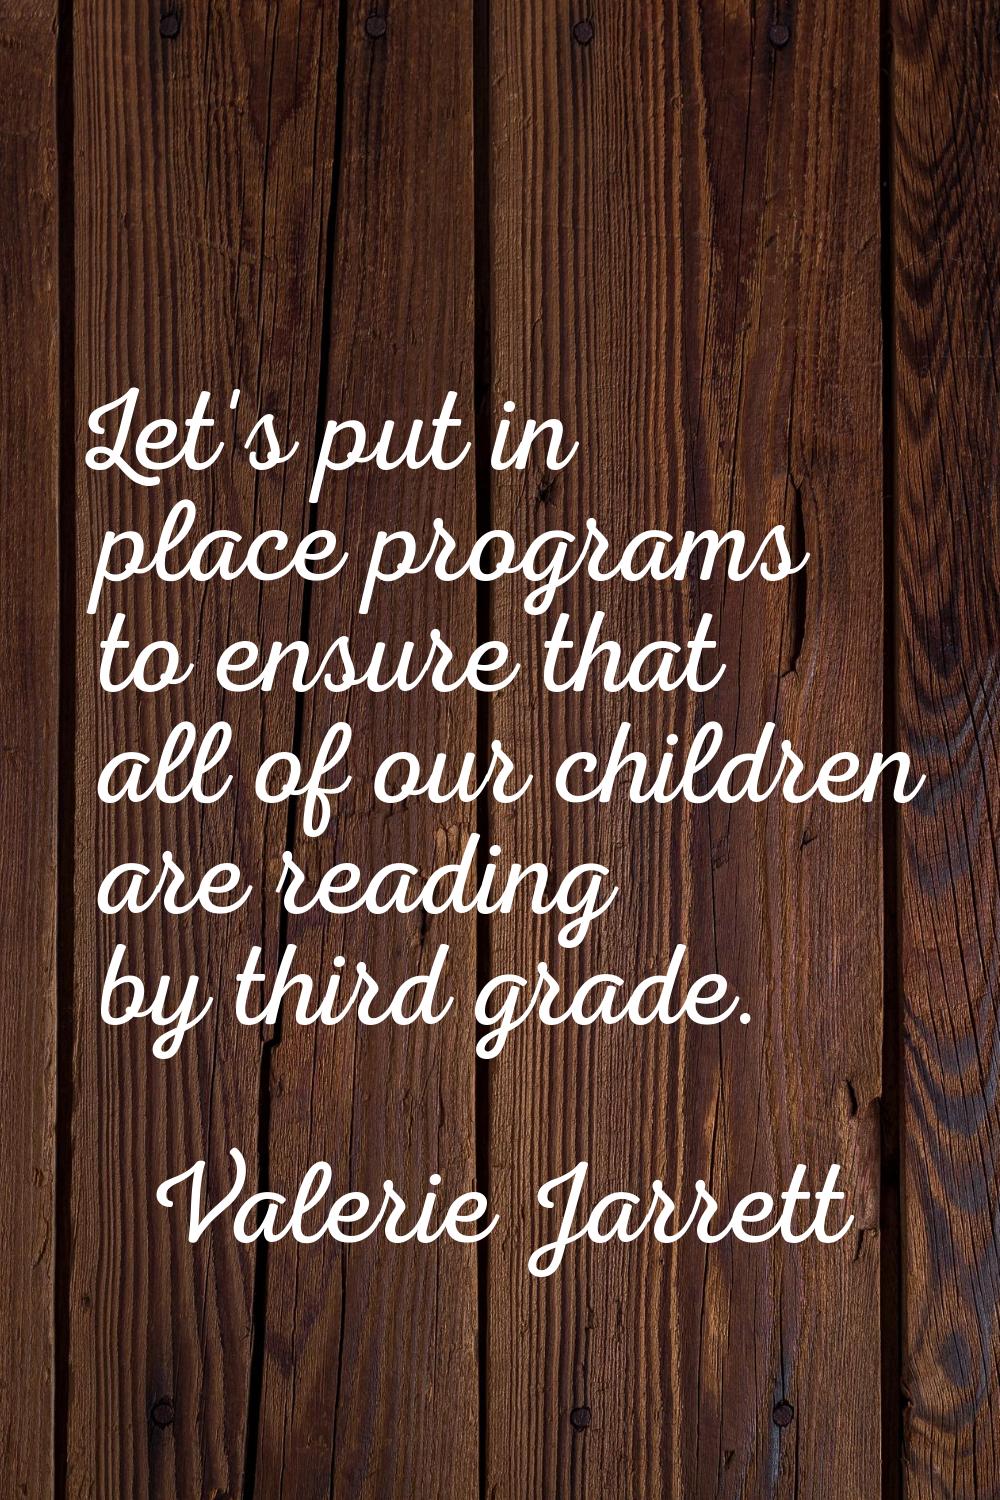 Let's put in place programs to ensure that all of our children are reading by third grade.